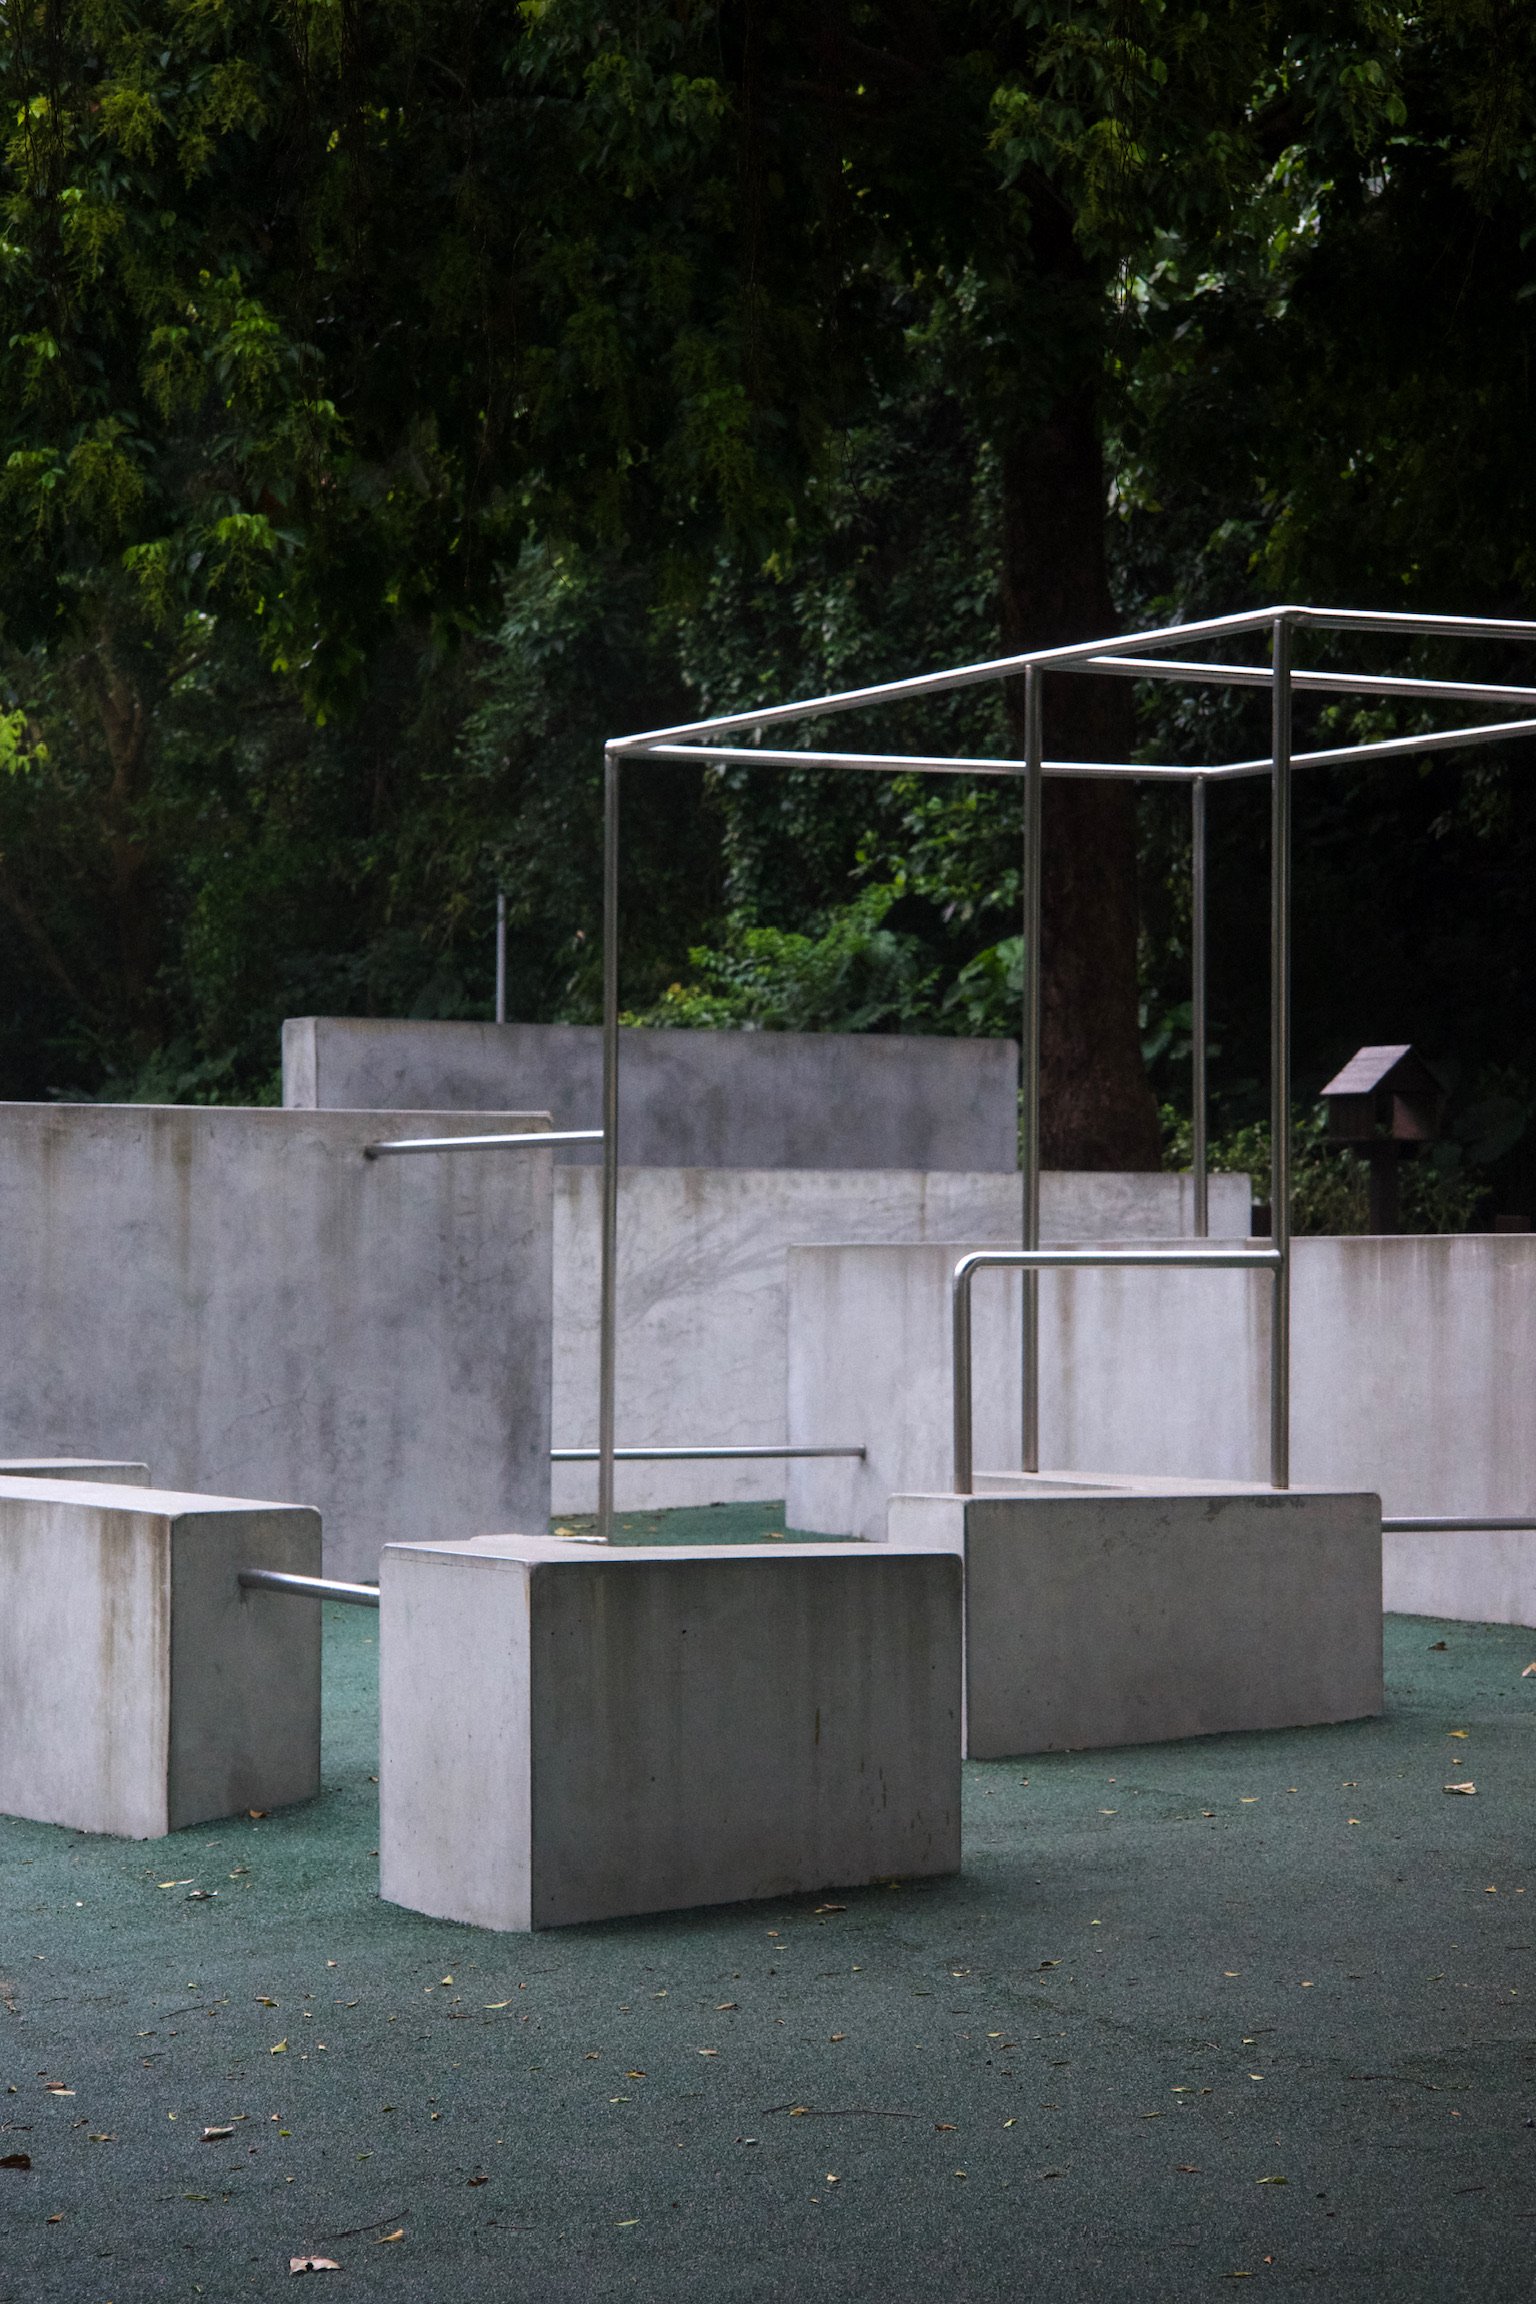 Concrete blocks of varying sizes and monkey bars in a park with lots of trees.